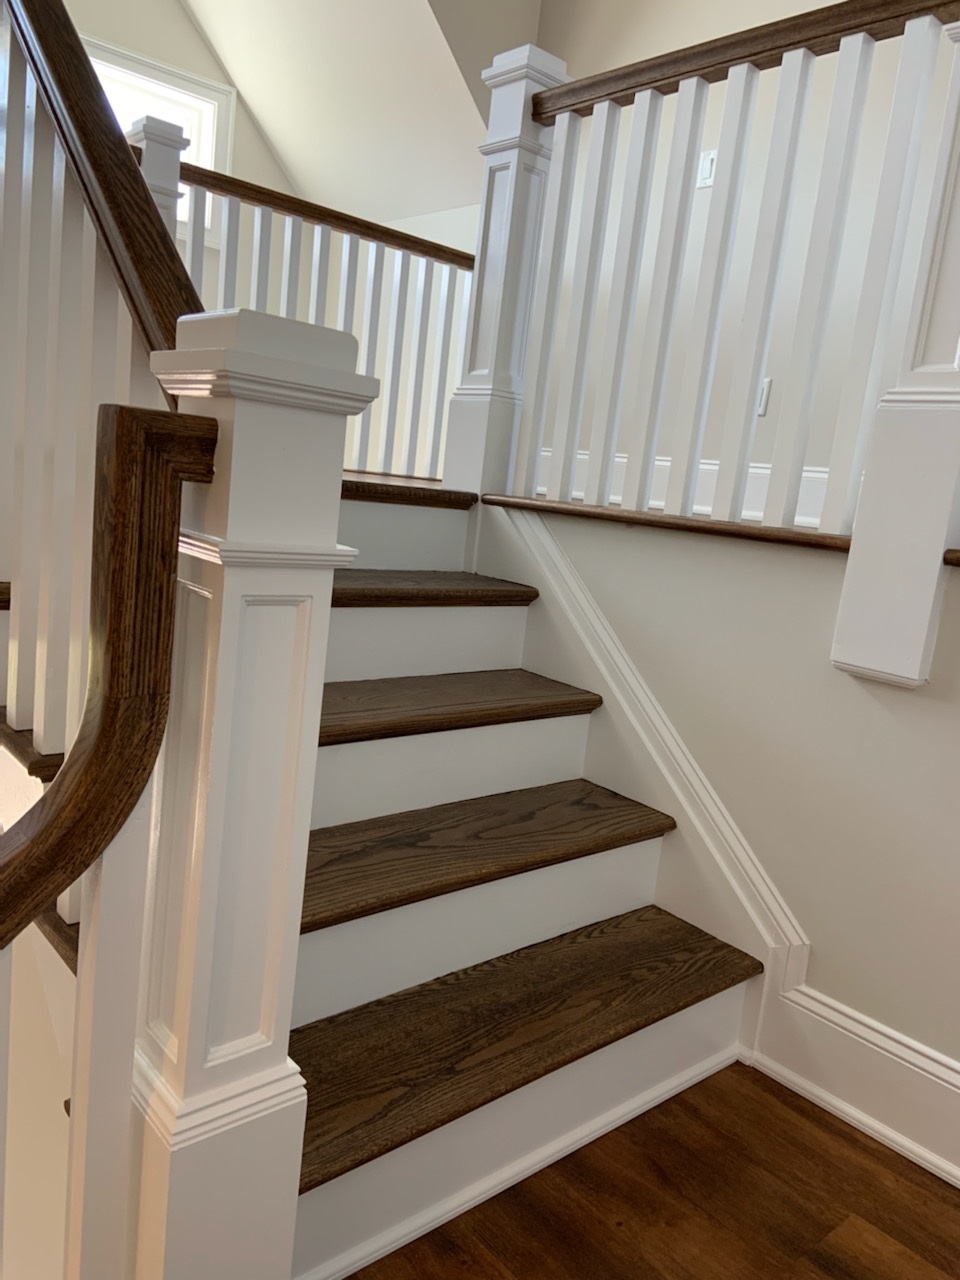 1.4 DSD Painting Stairwell | OCNJ Daily